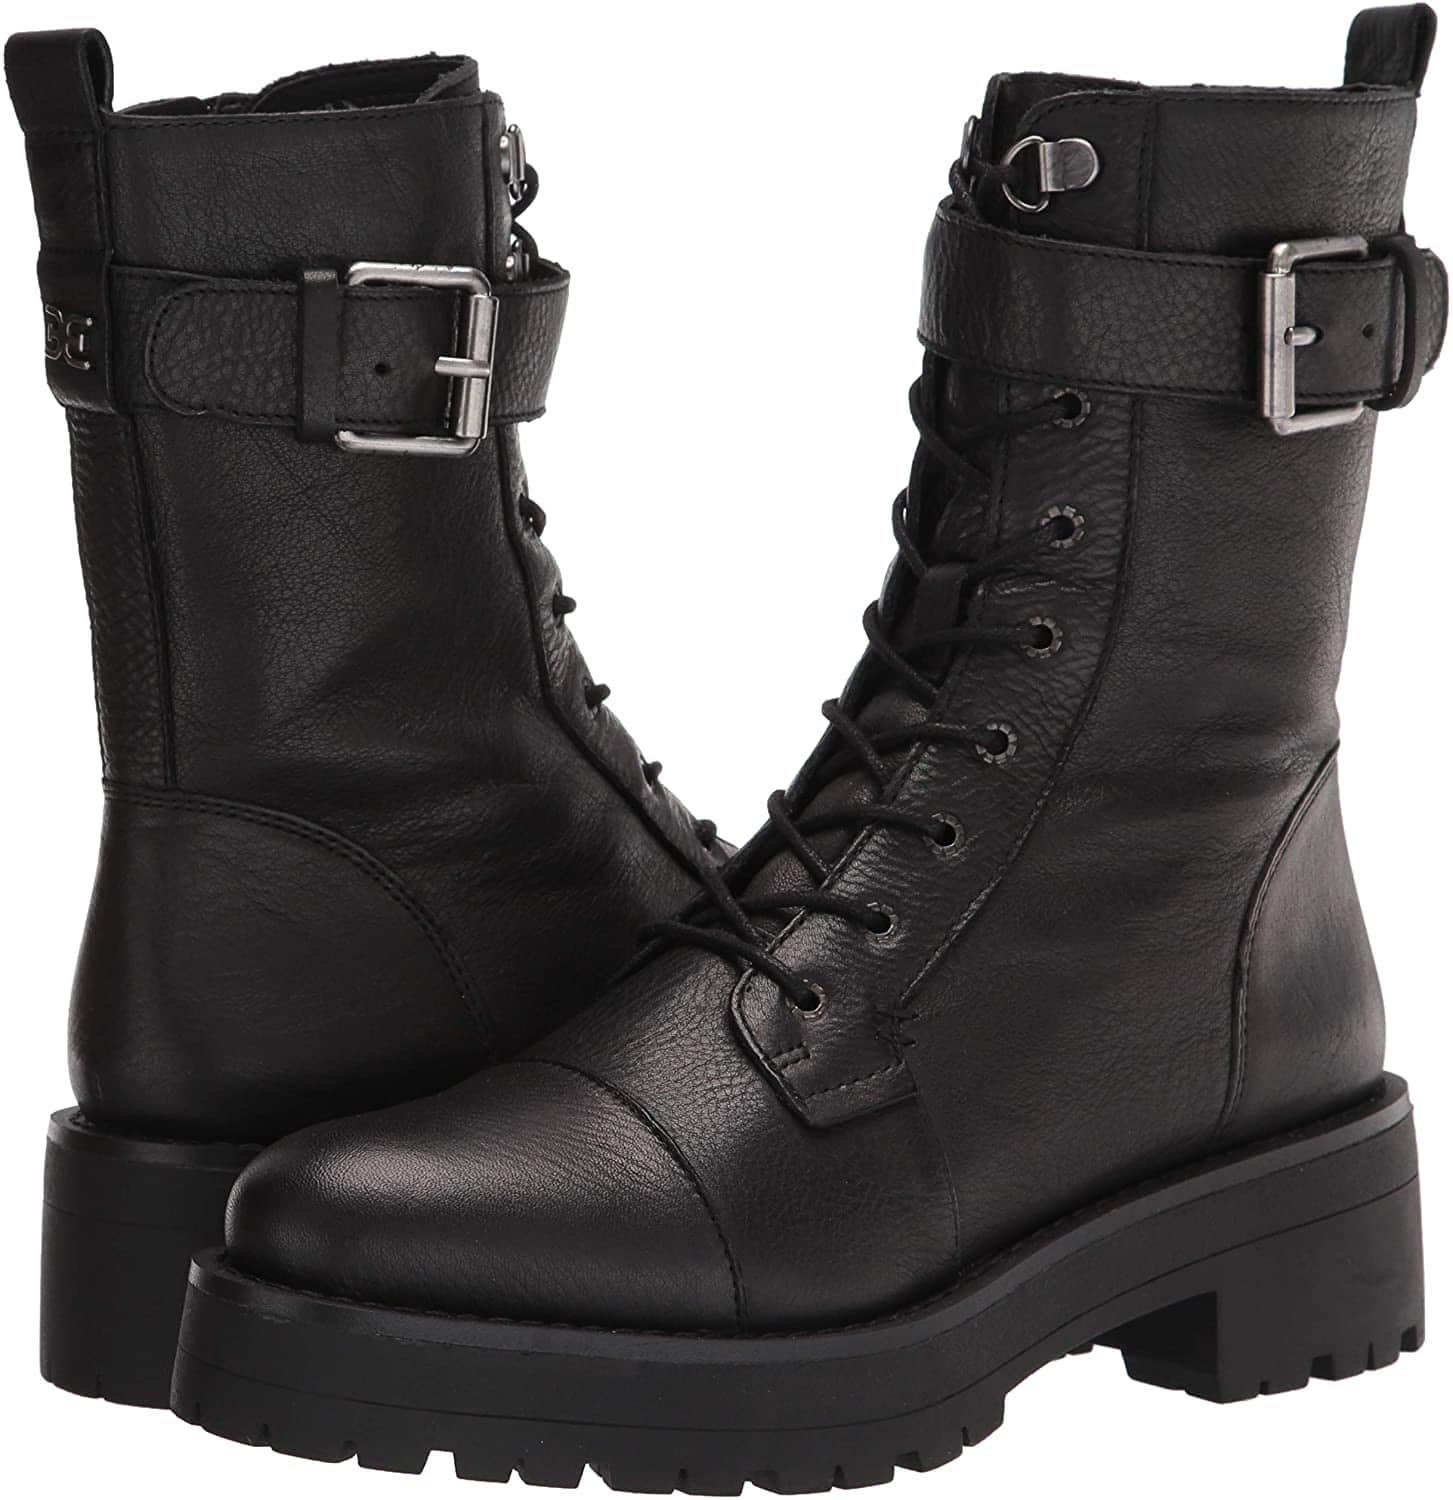 10 Best Combat Boots and Fashionable Women’s LaceUp Boots